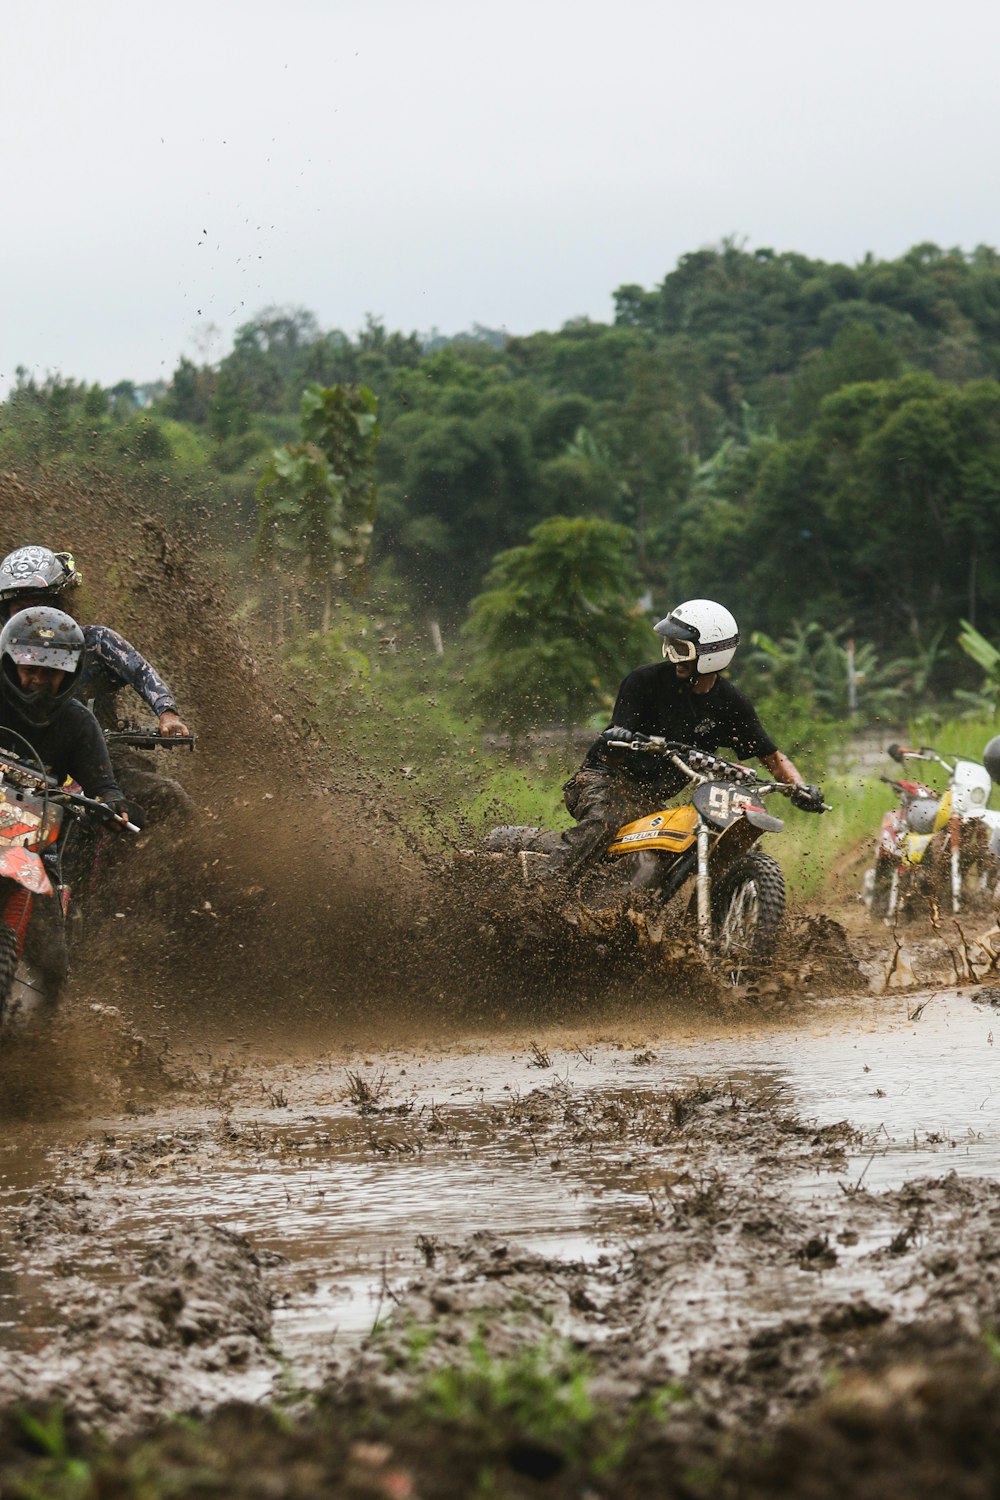 a couple of people riding on the back of dirt bikes